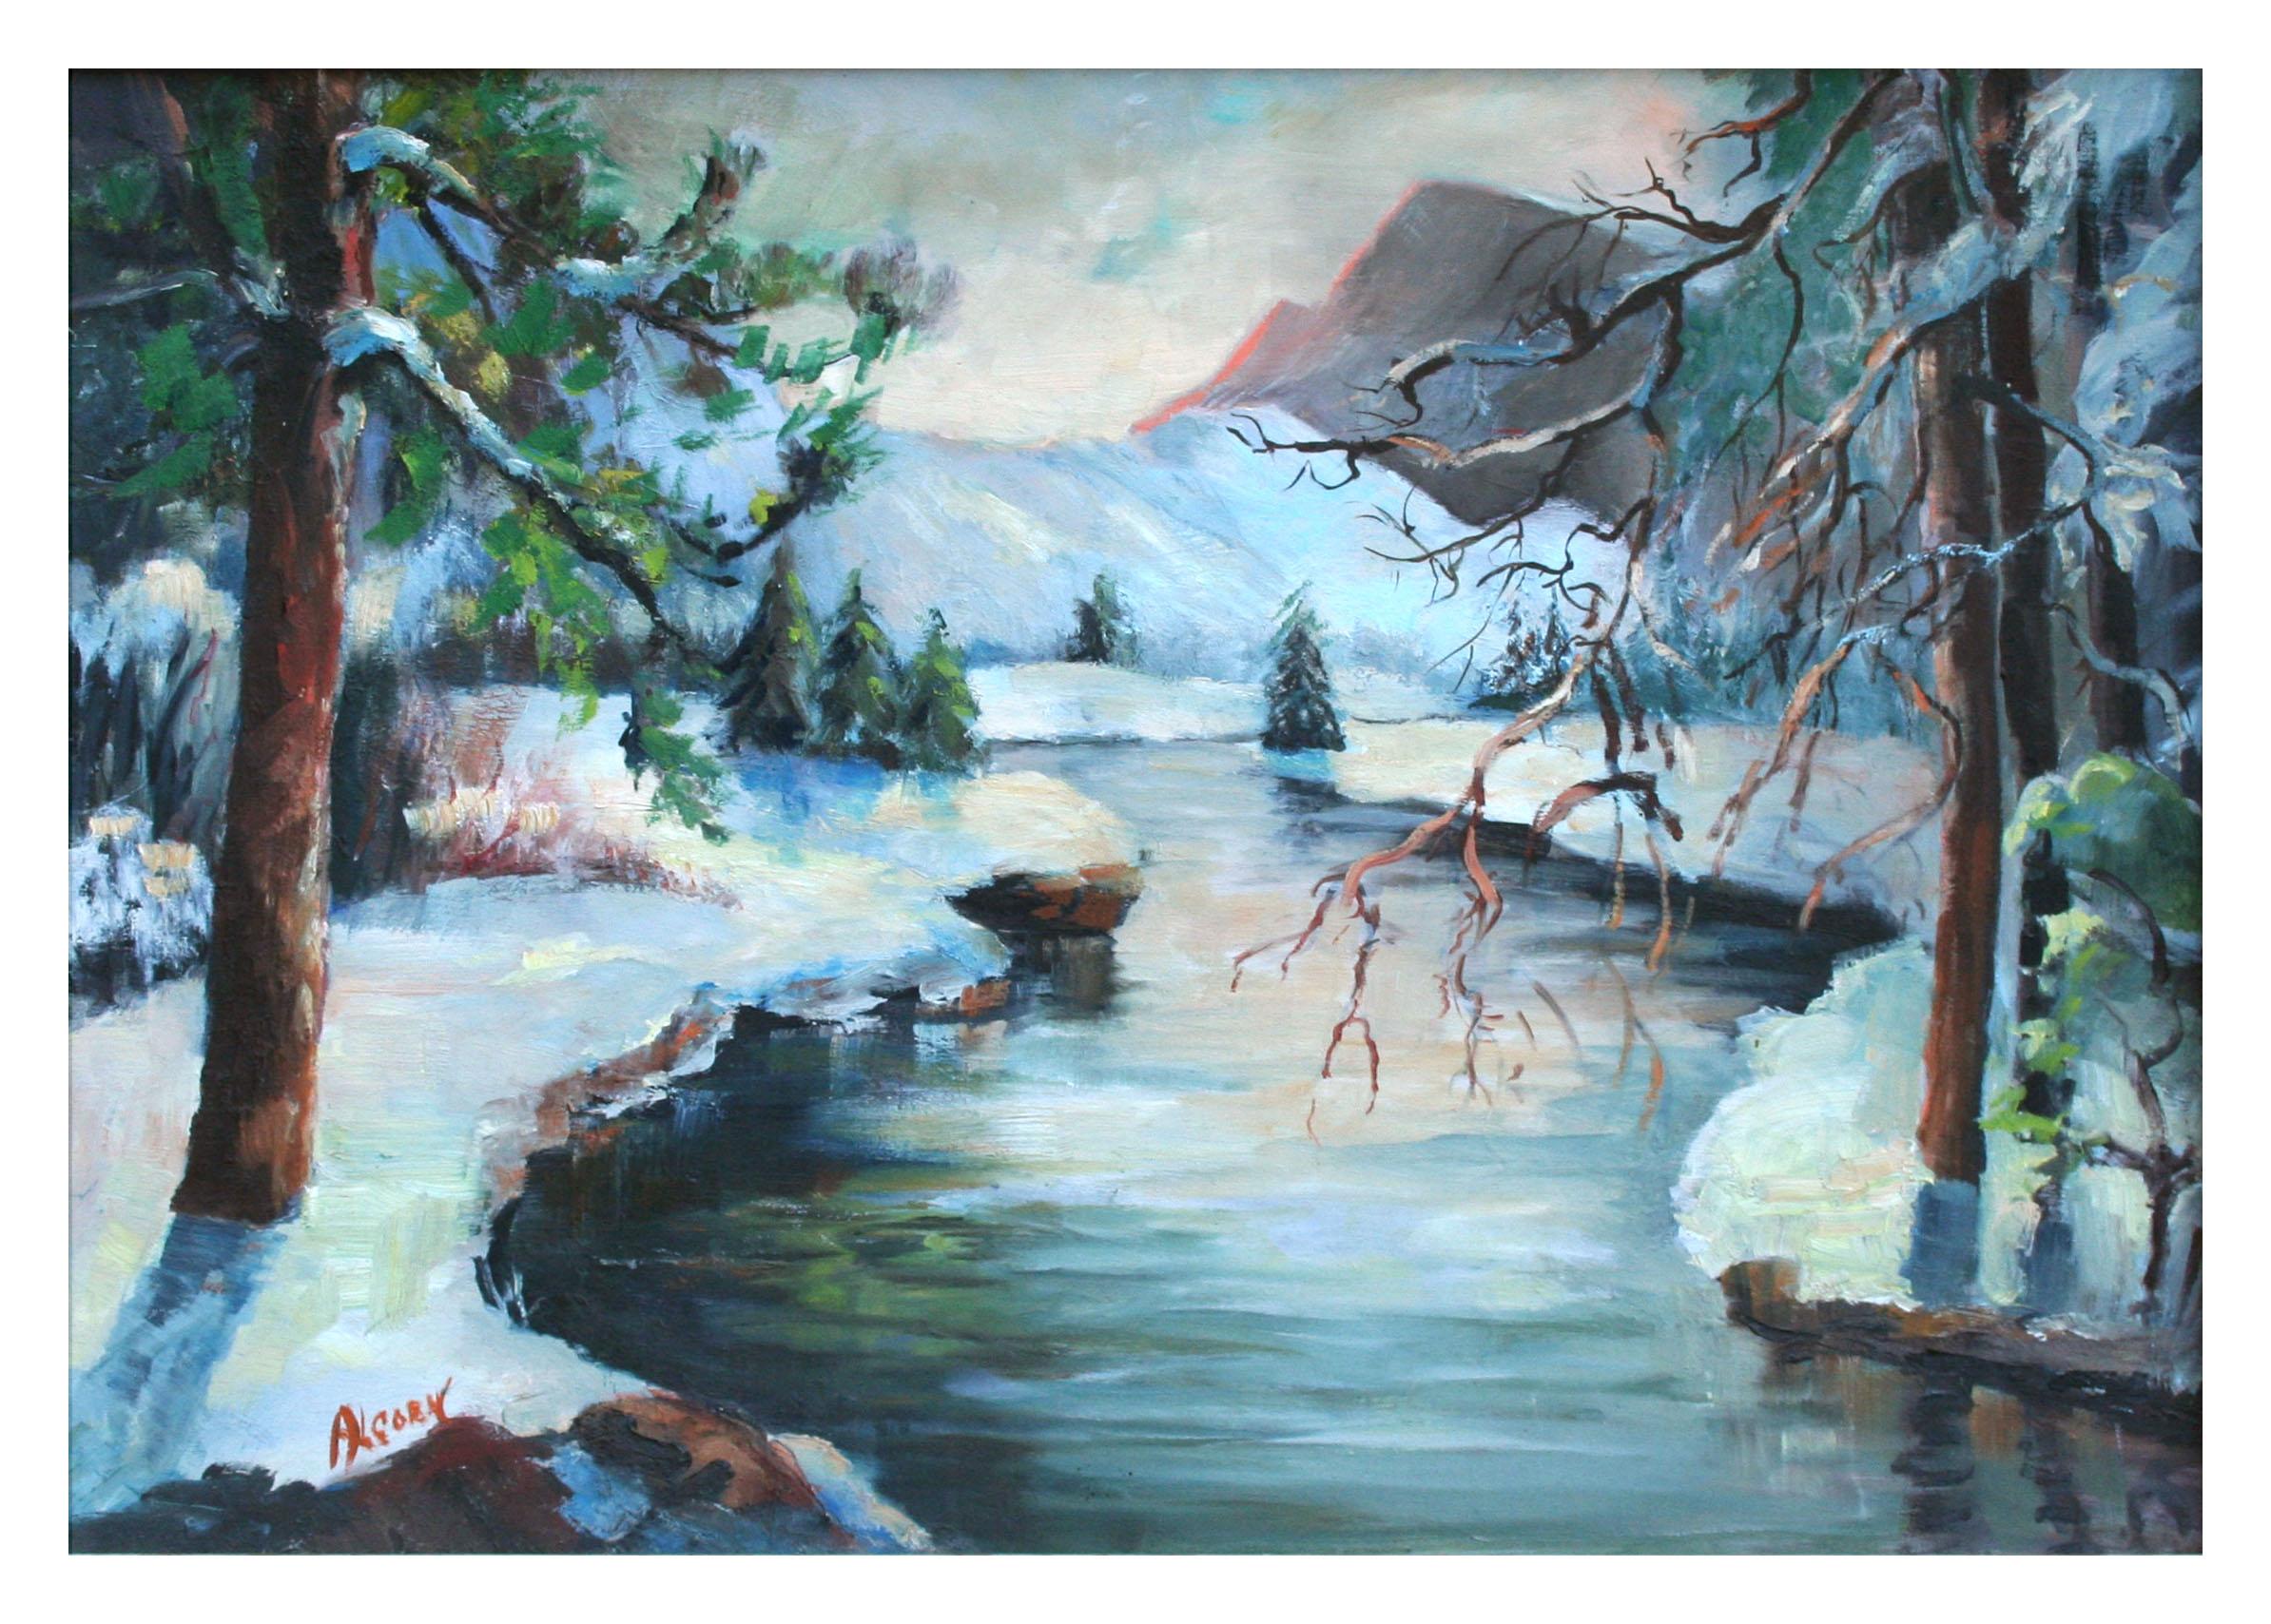 Mountain Stream in Snow, Mid Century Yosemite Winter Landscape - Painting by Rowena Lung Alcorn